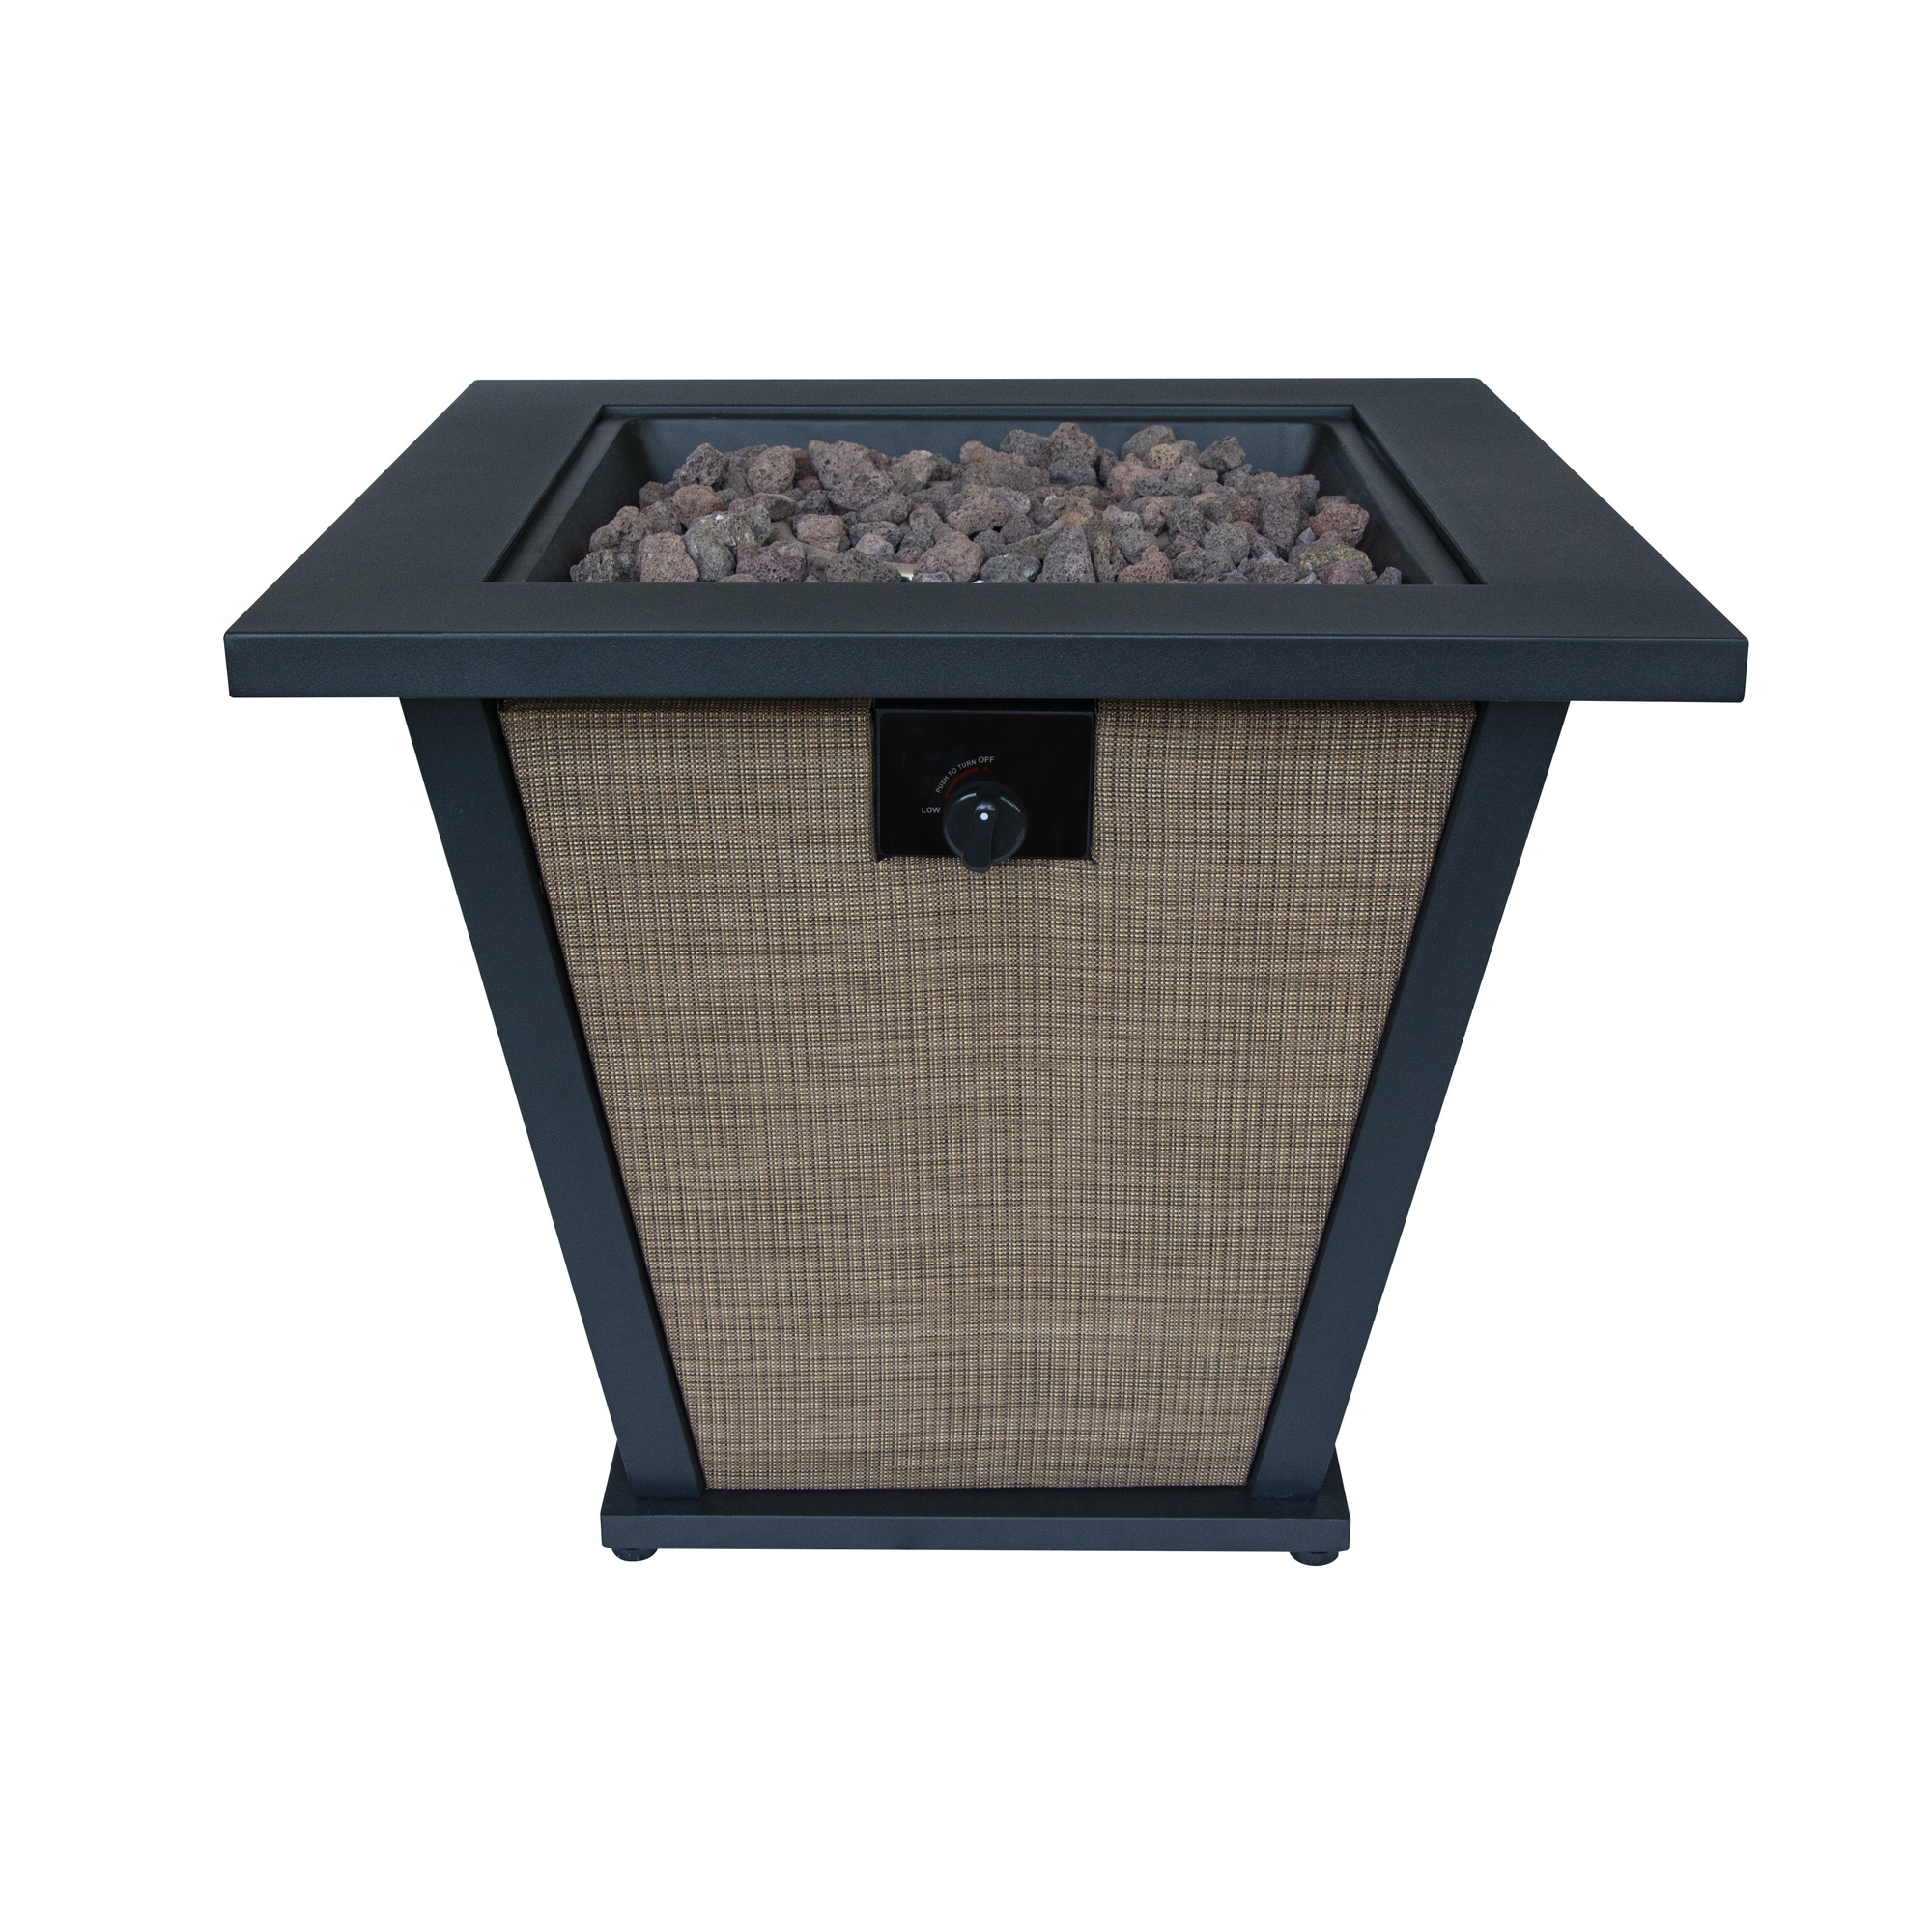 Bond, Brently 28Inch Gas Fire Pit, Fuel Type Propane, Material Steel, Model 52137